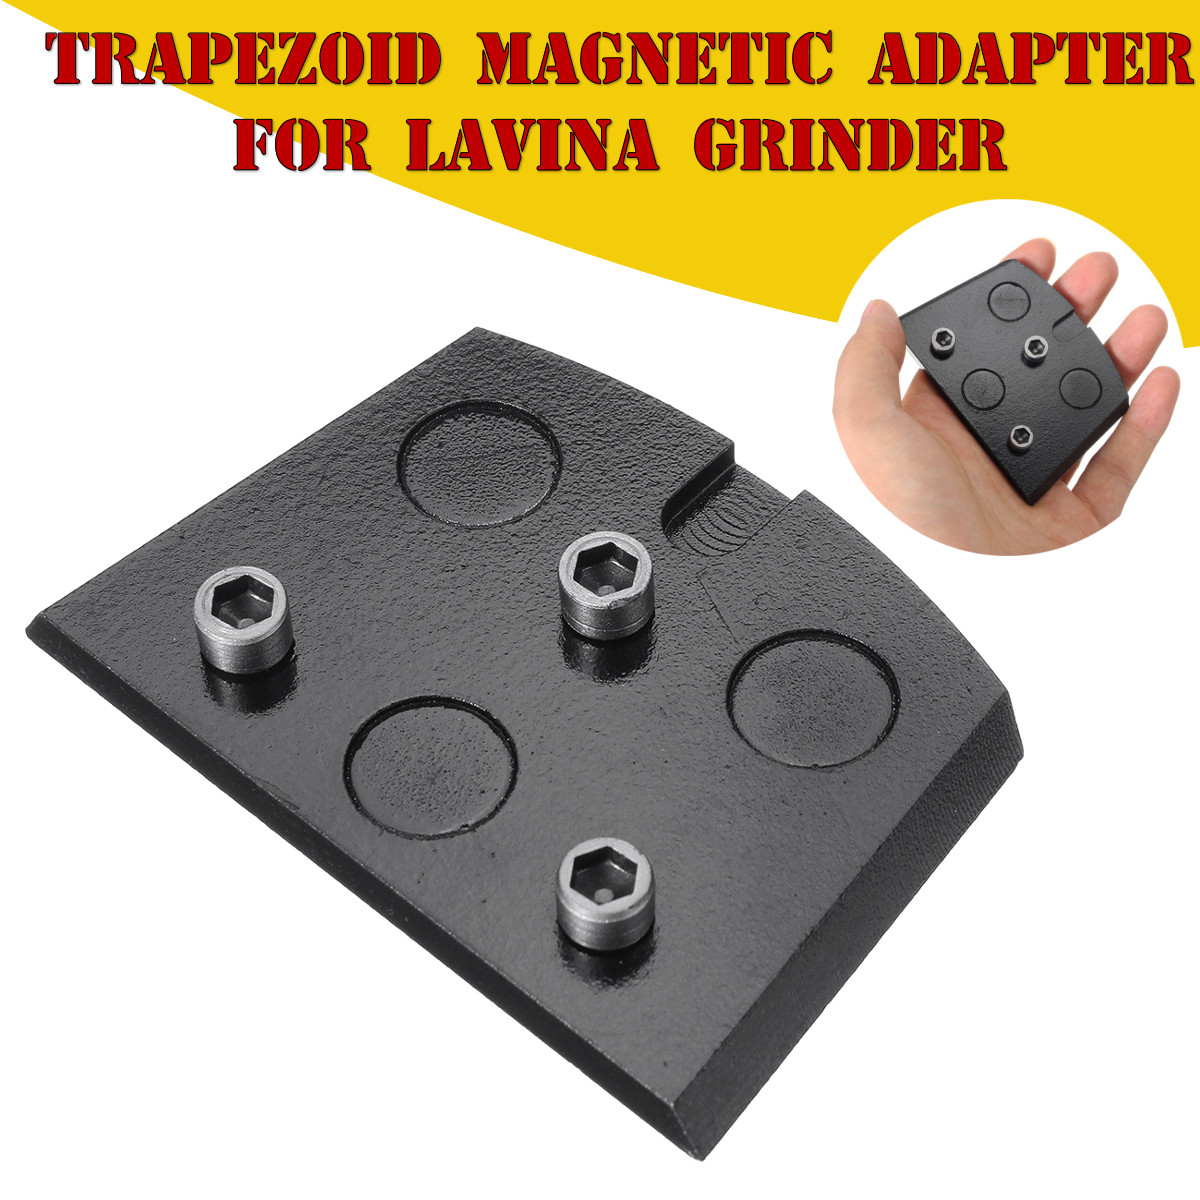 Trapezoid-Griinding-Head-Adapter-For-Lavina-Grinder-Grinding-Polishing-Machine-1585129-1